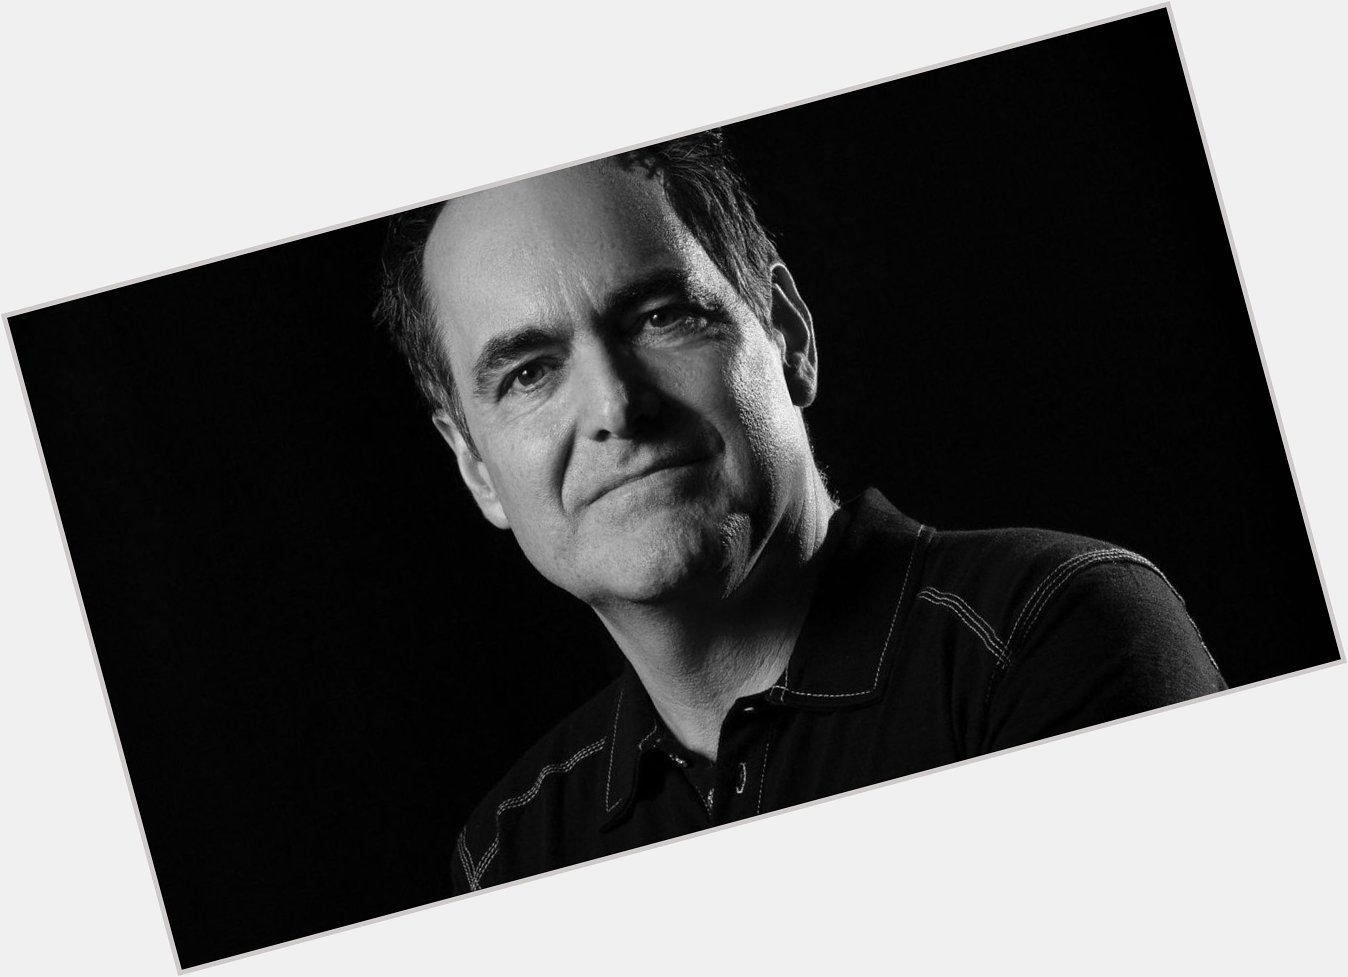 Happy birthday to Neal Morse, who is 57 today! 